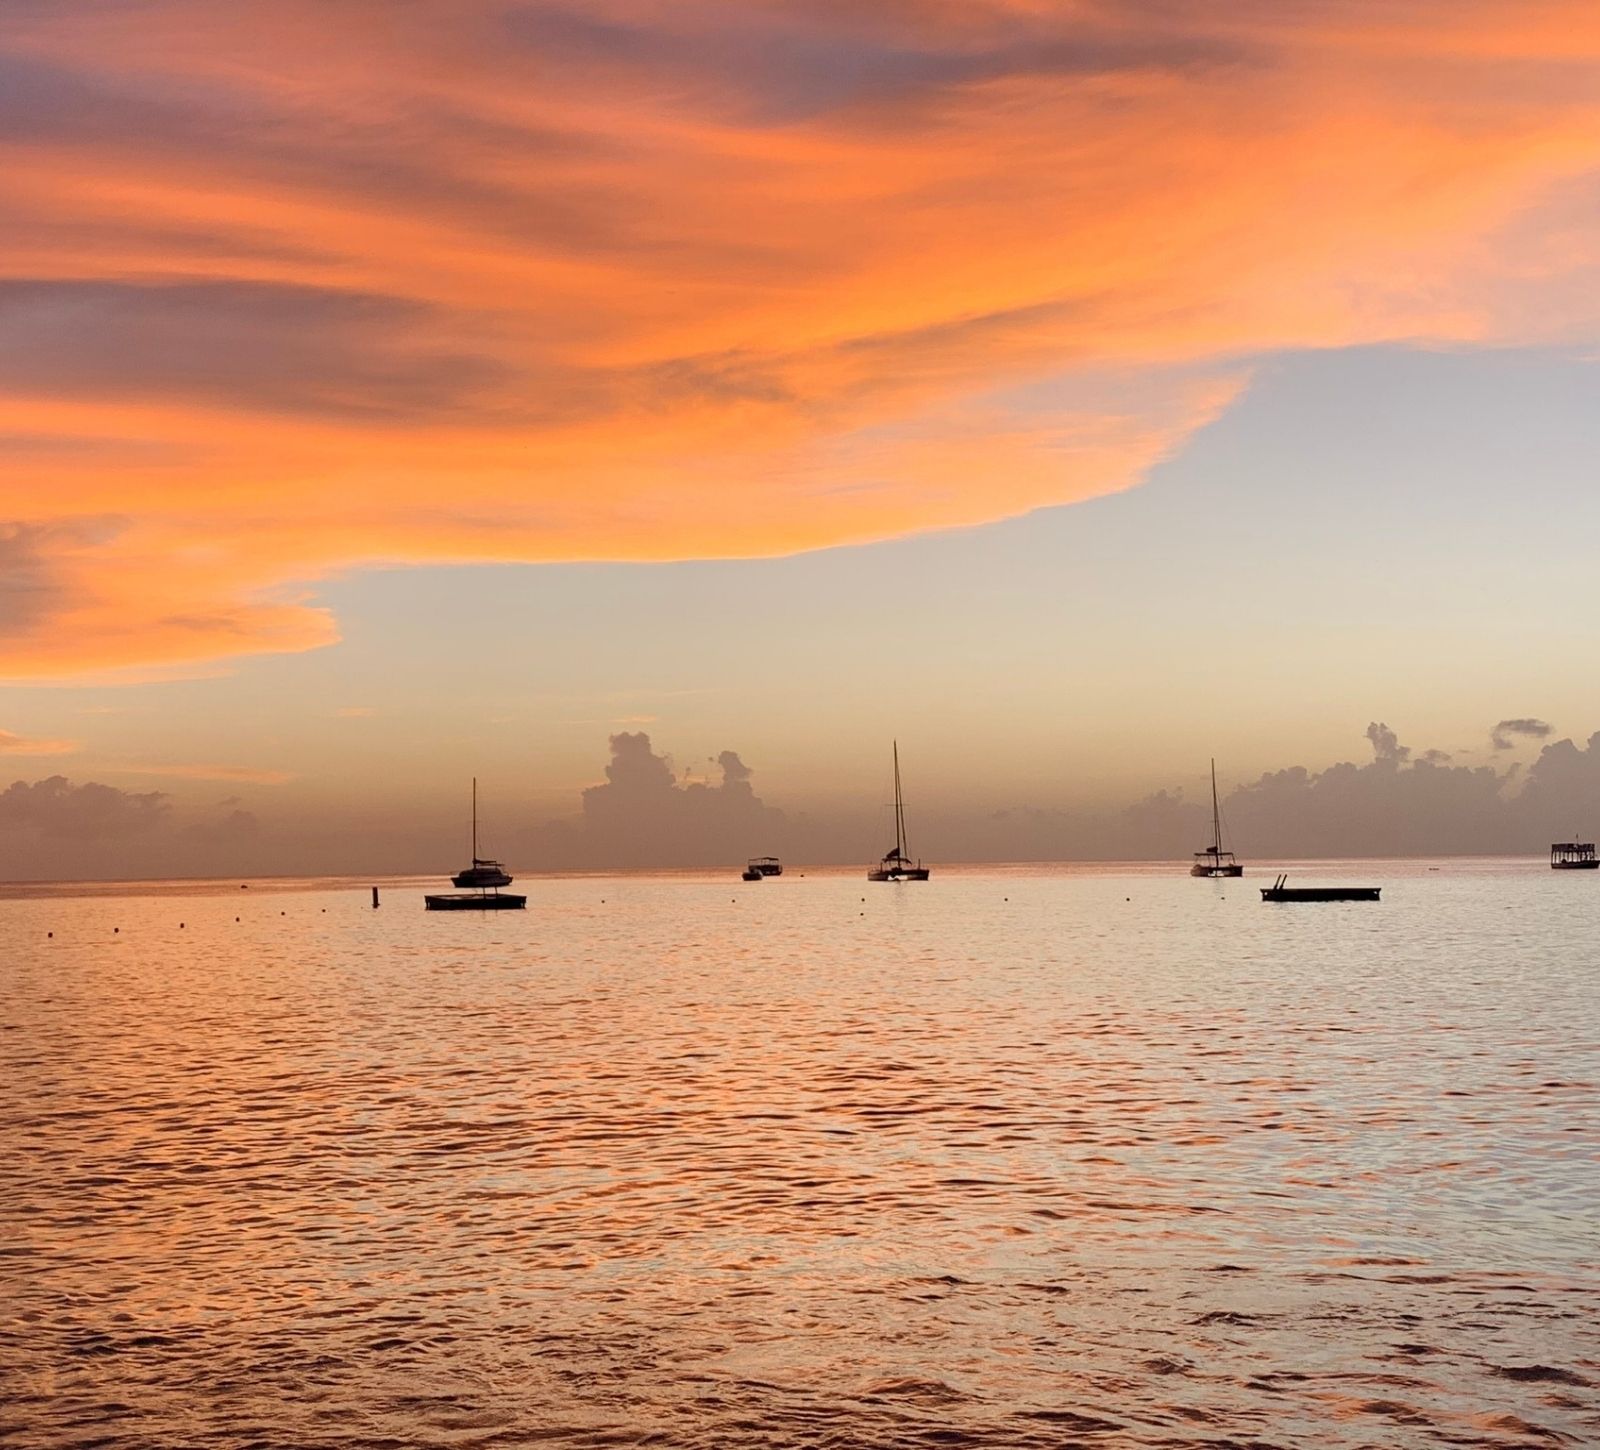 Kitchen Table CEOs Blog - 8 Tips to help you take a REAL Vacation - Barbados vacation picture with sunset with sailboats and ocean